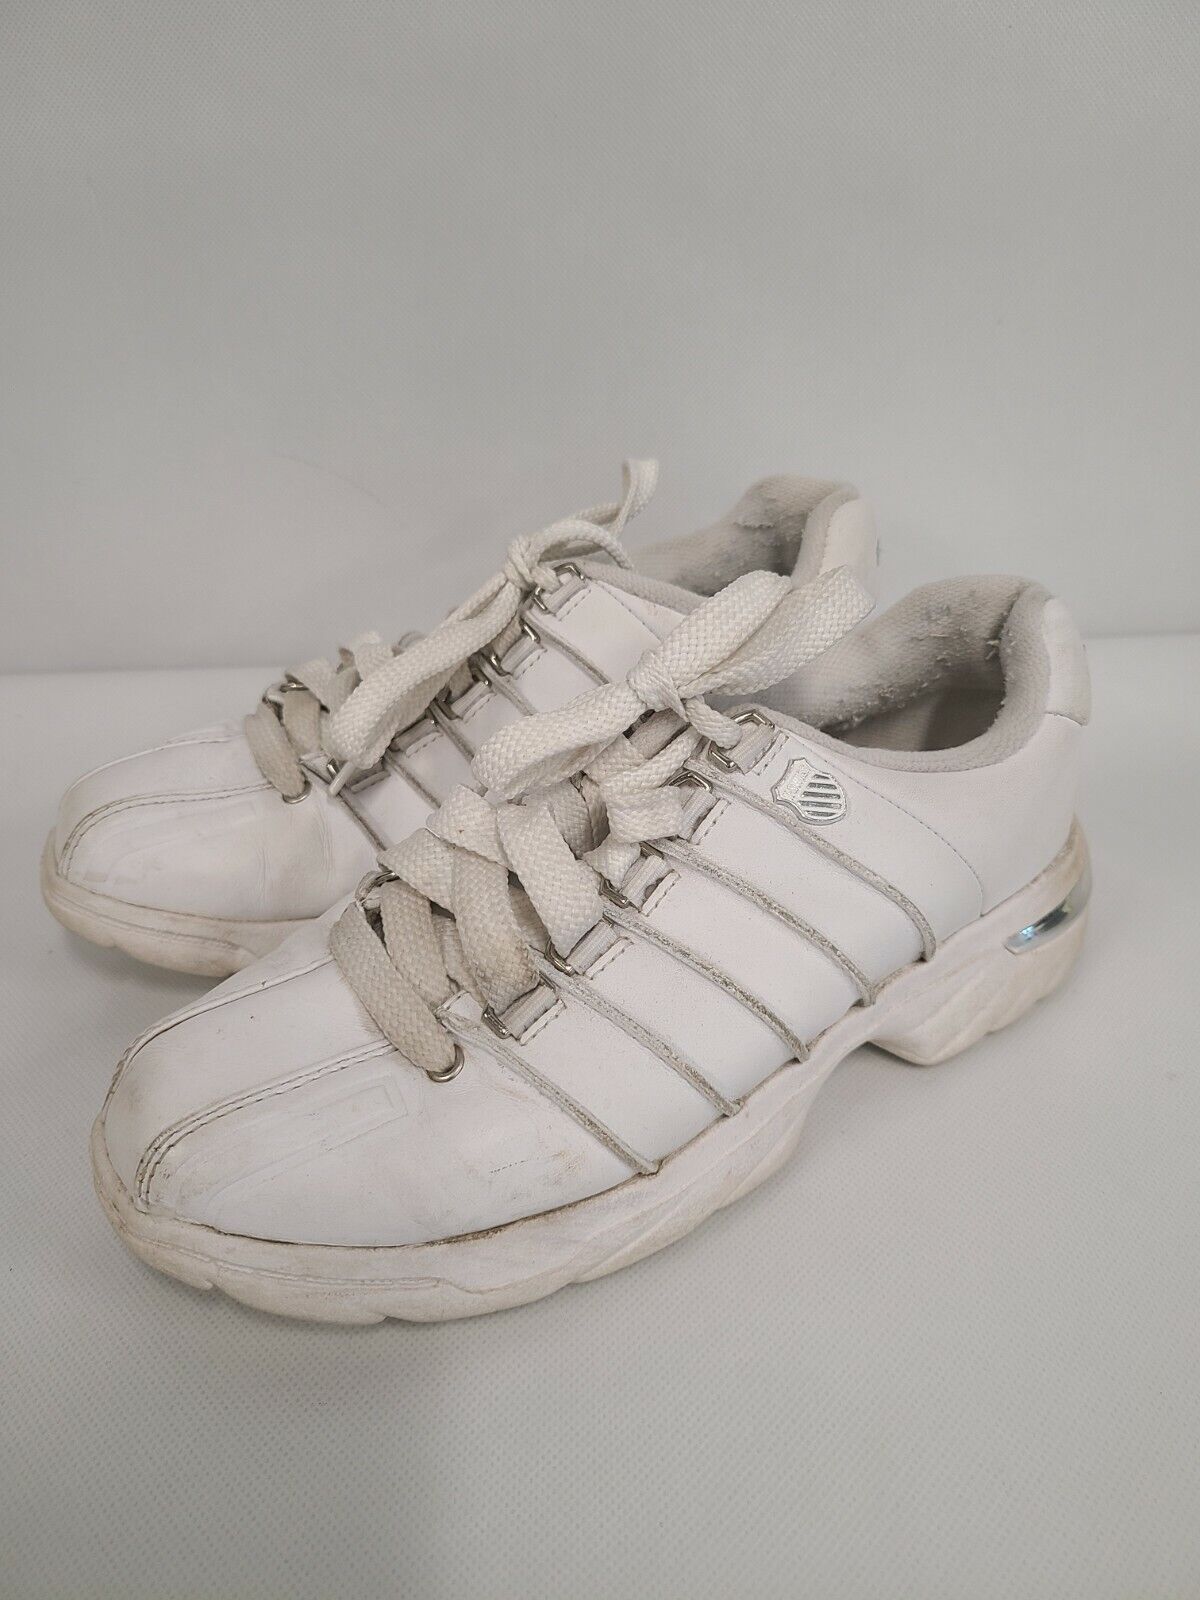 stimuleren Mail Landgoed K-Swiss Womens Sneakers Size 6.5 White Low Top Lace Up Comfort Casual Shoes  | eBay